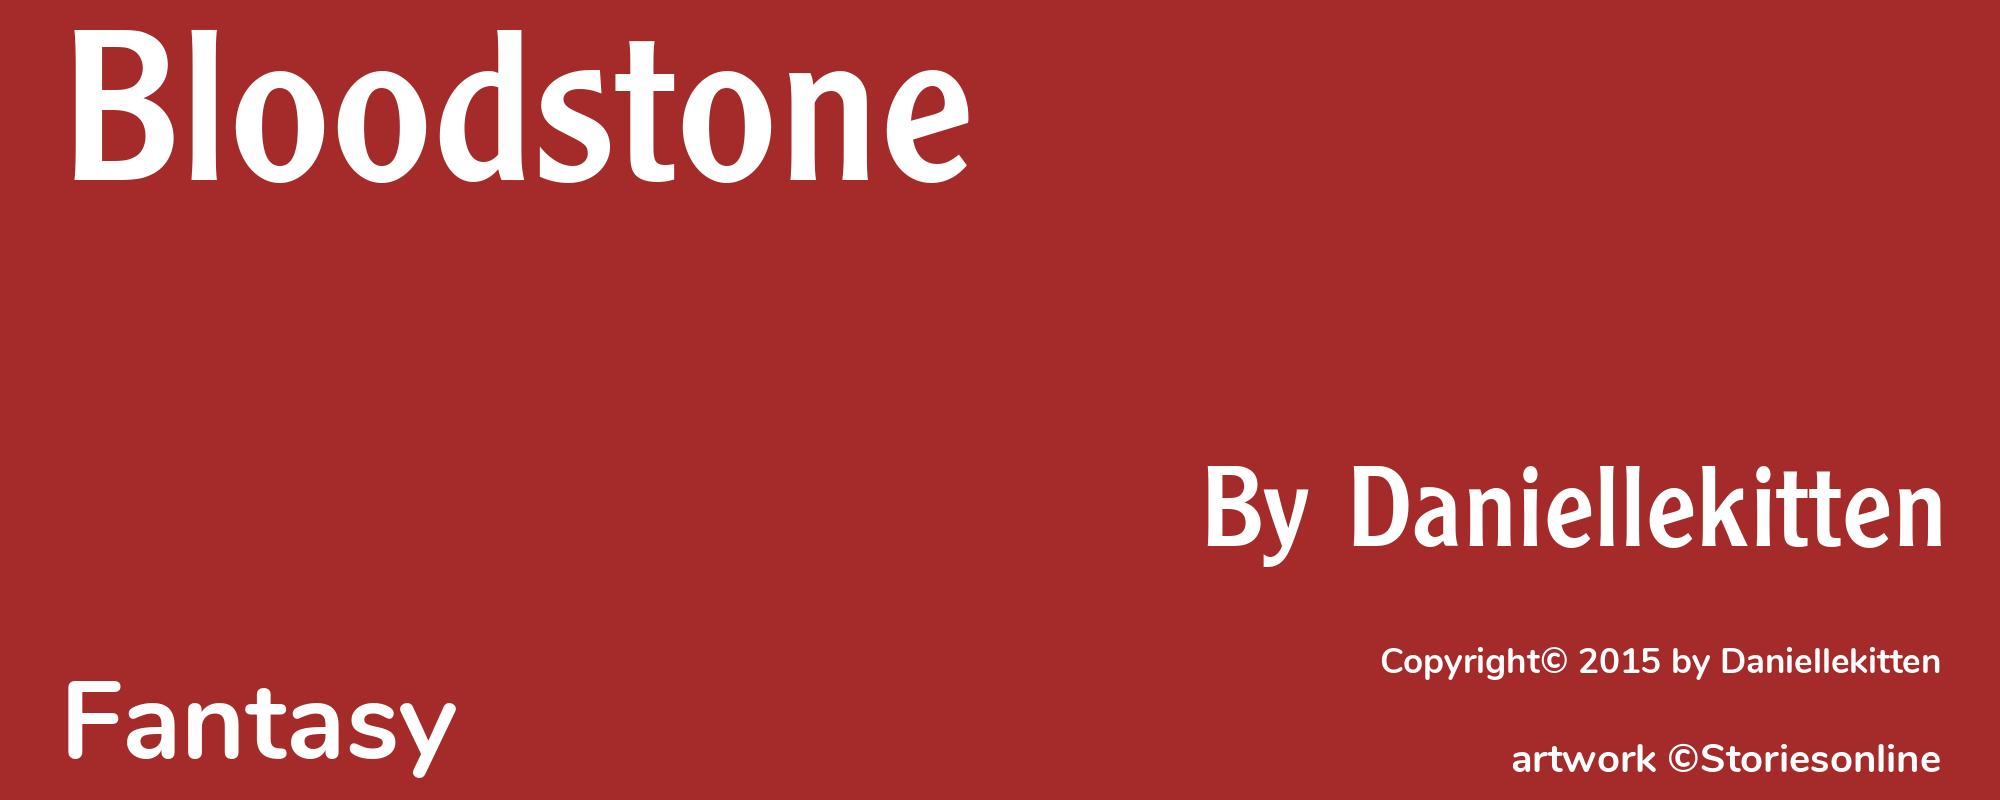 Bloodstone - Cover